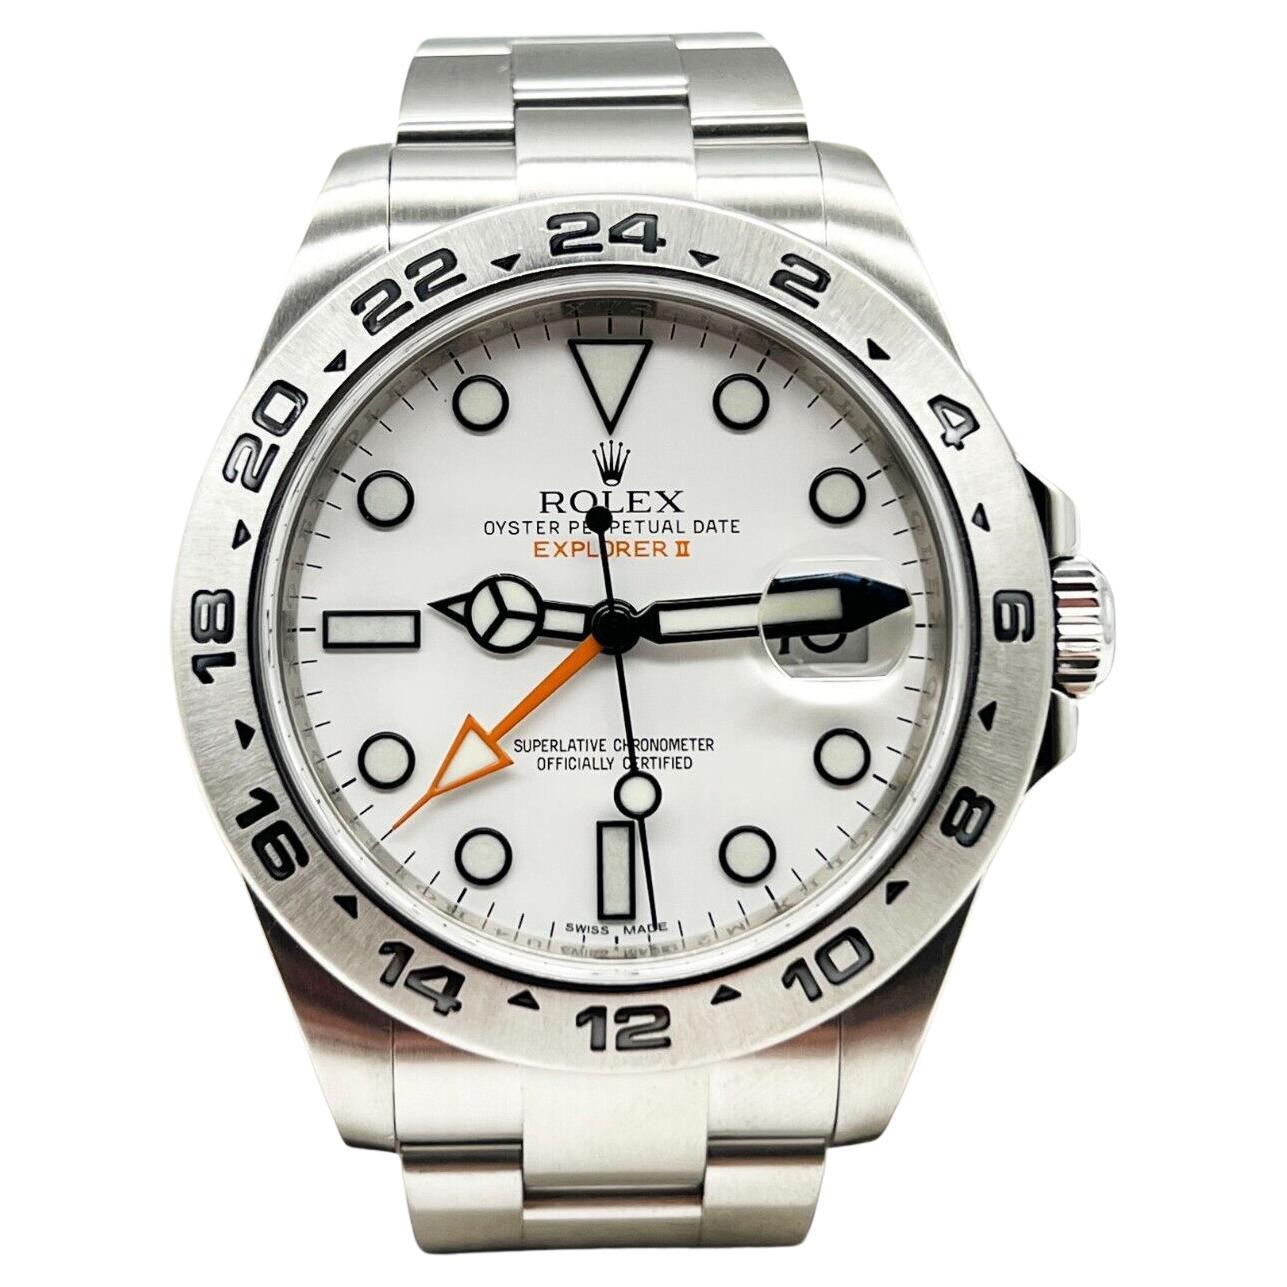 Rolex 216570 Explorer II White Dial Stainless Steel